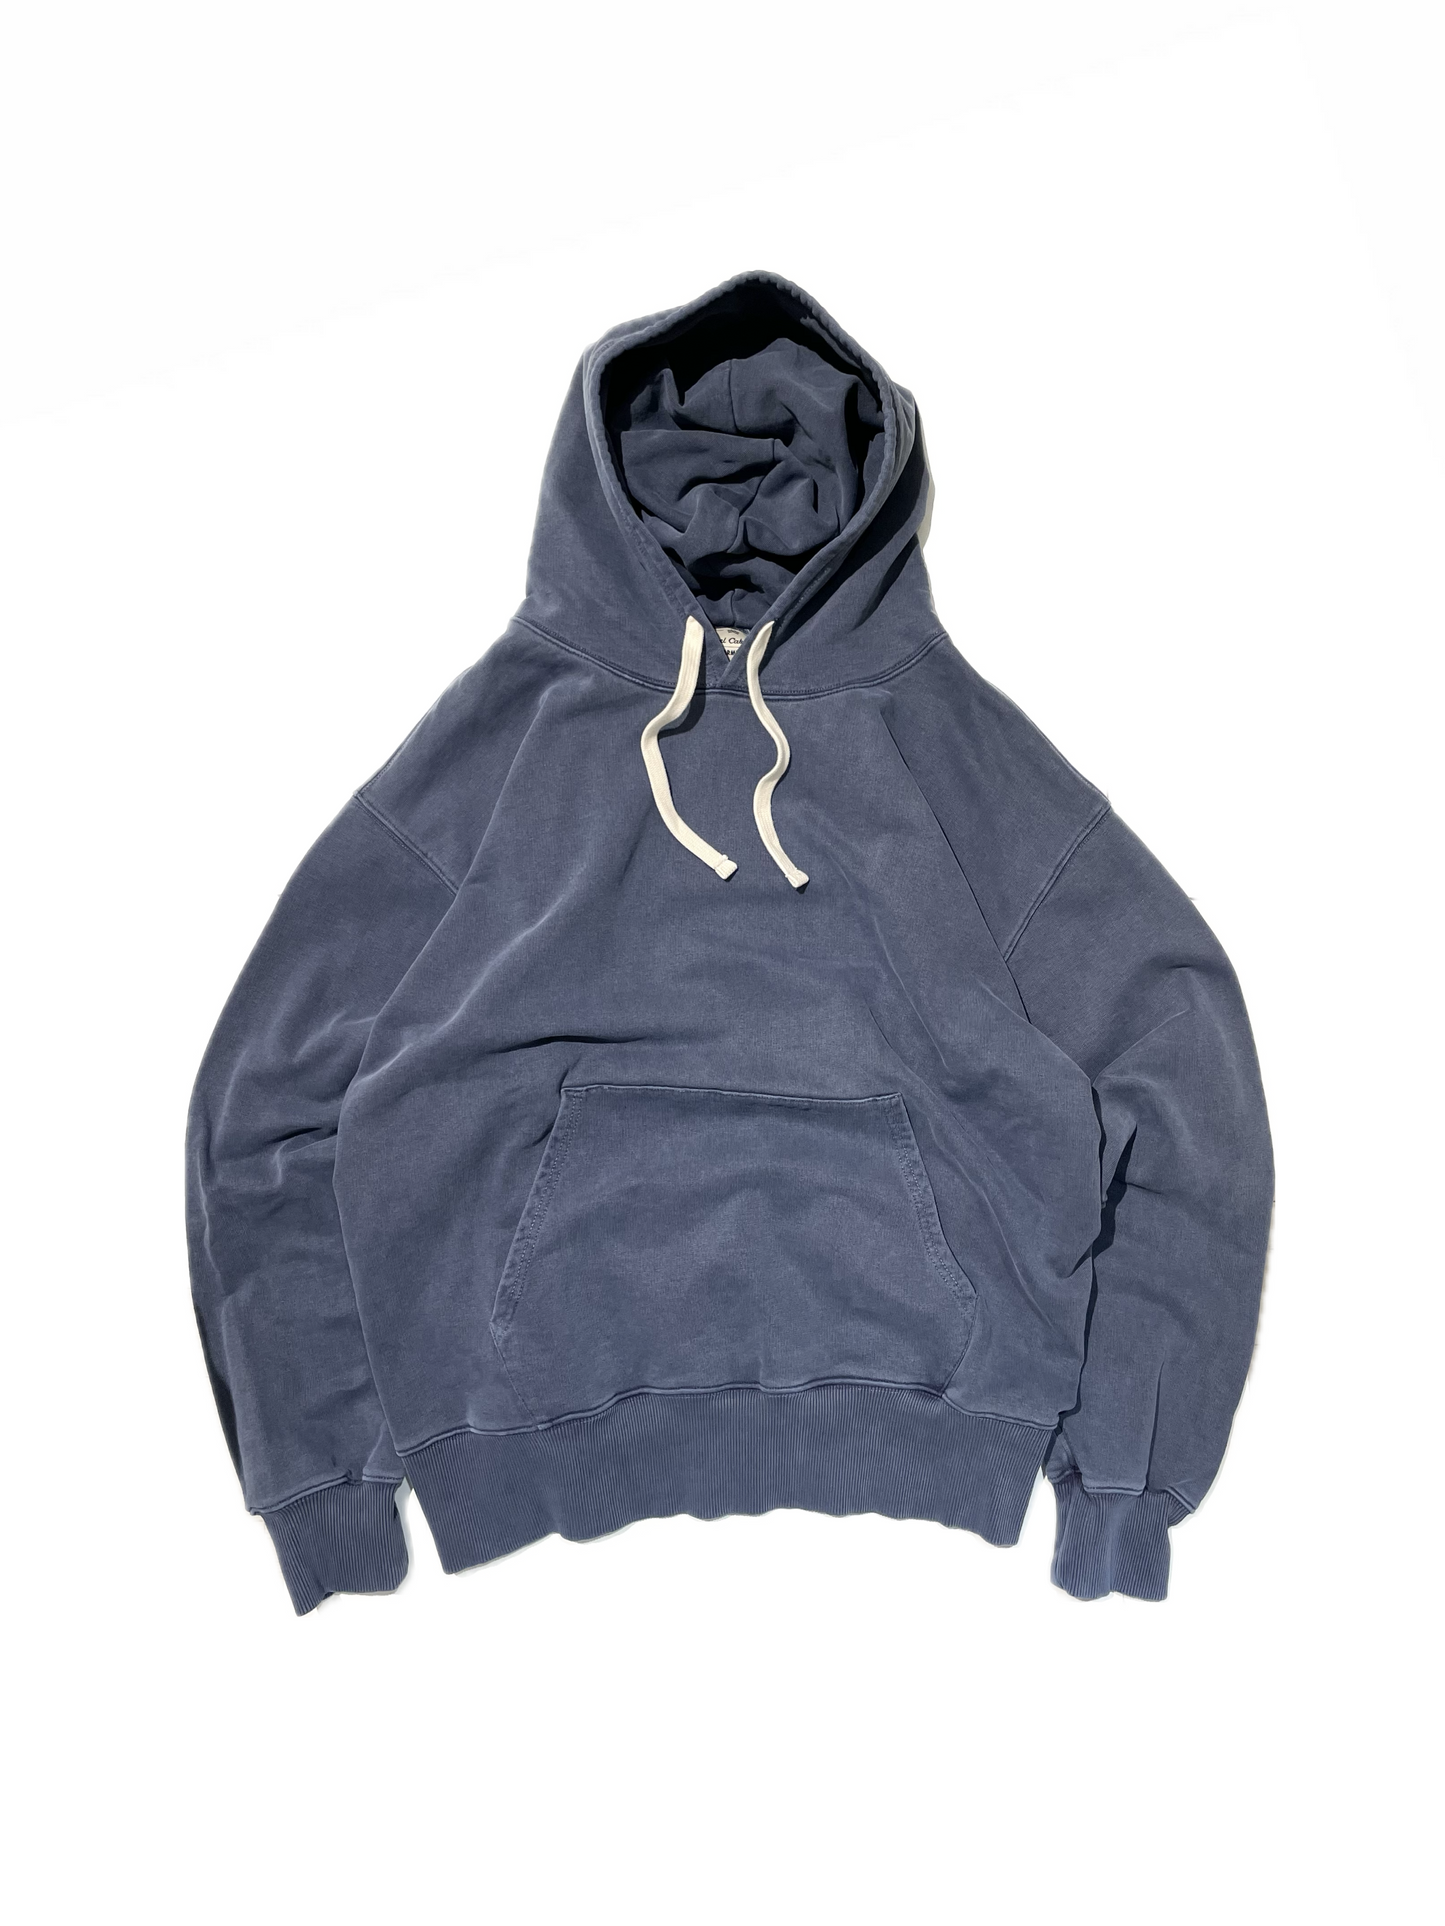 Nigel Cabourn Embroidered Arrow Hoodie